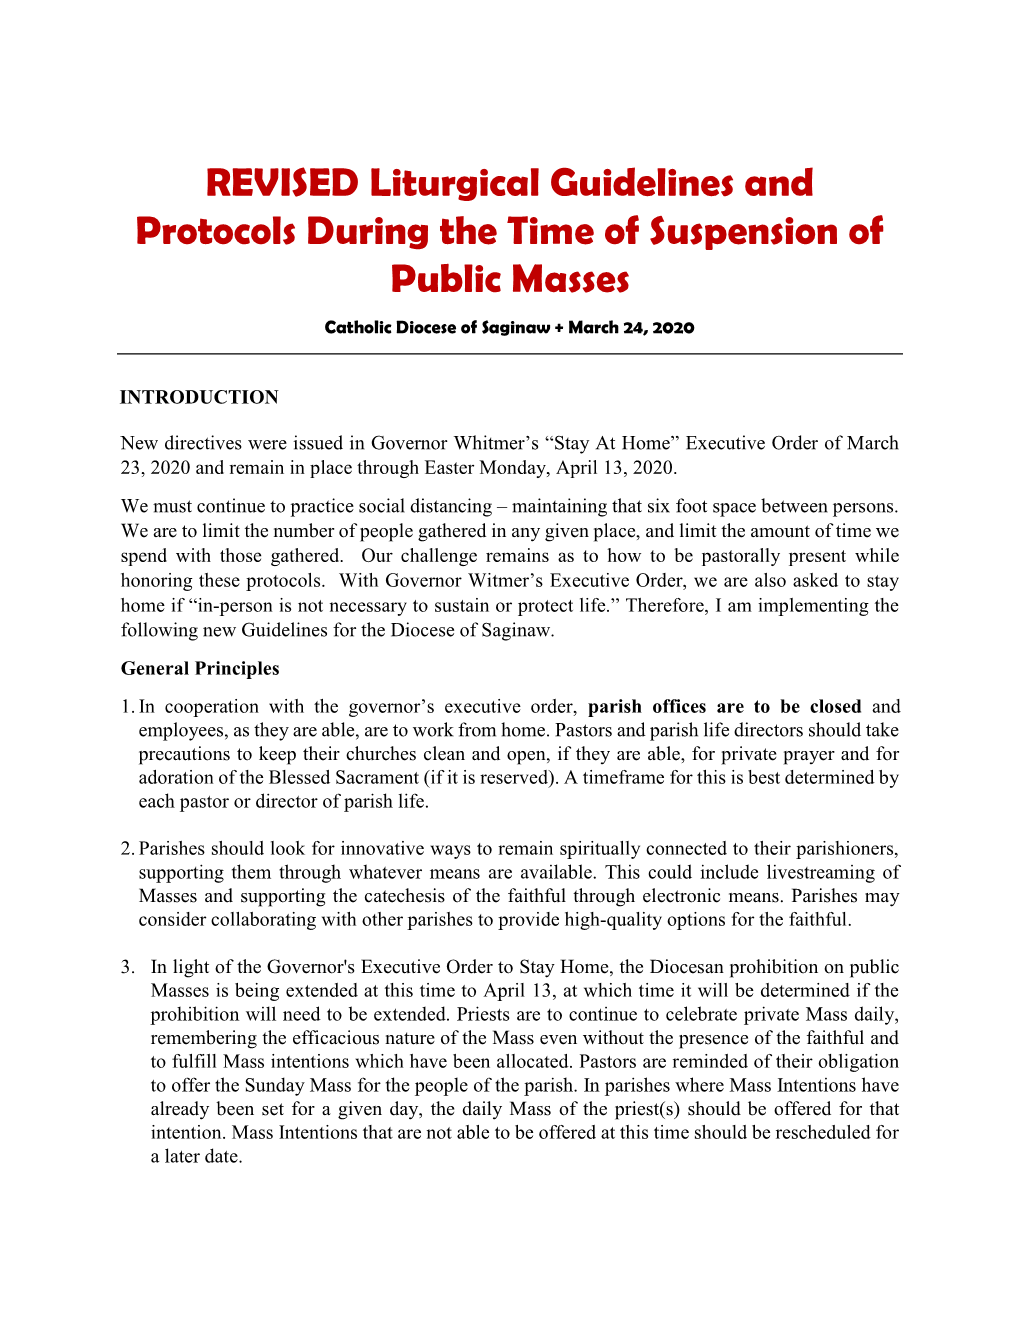 REVISED Liturgical Guidelines and Protocols During the Time of Suspension of Public Masses